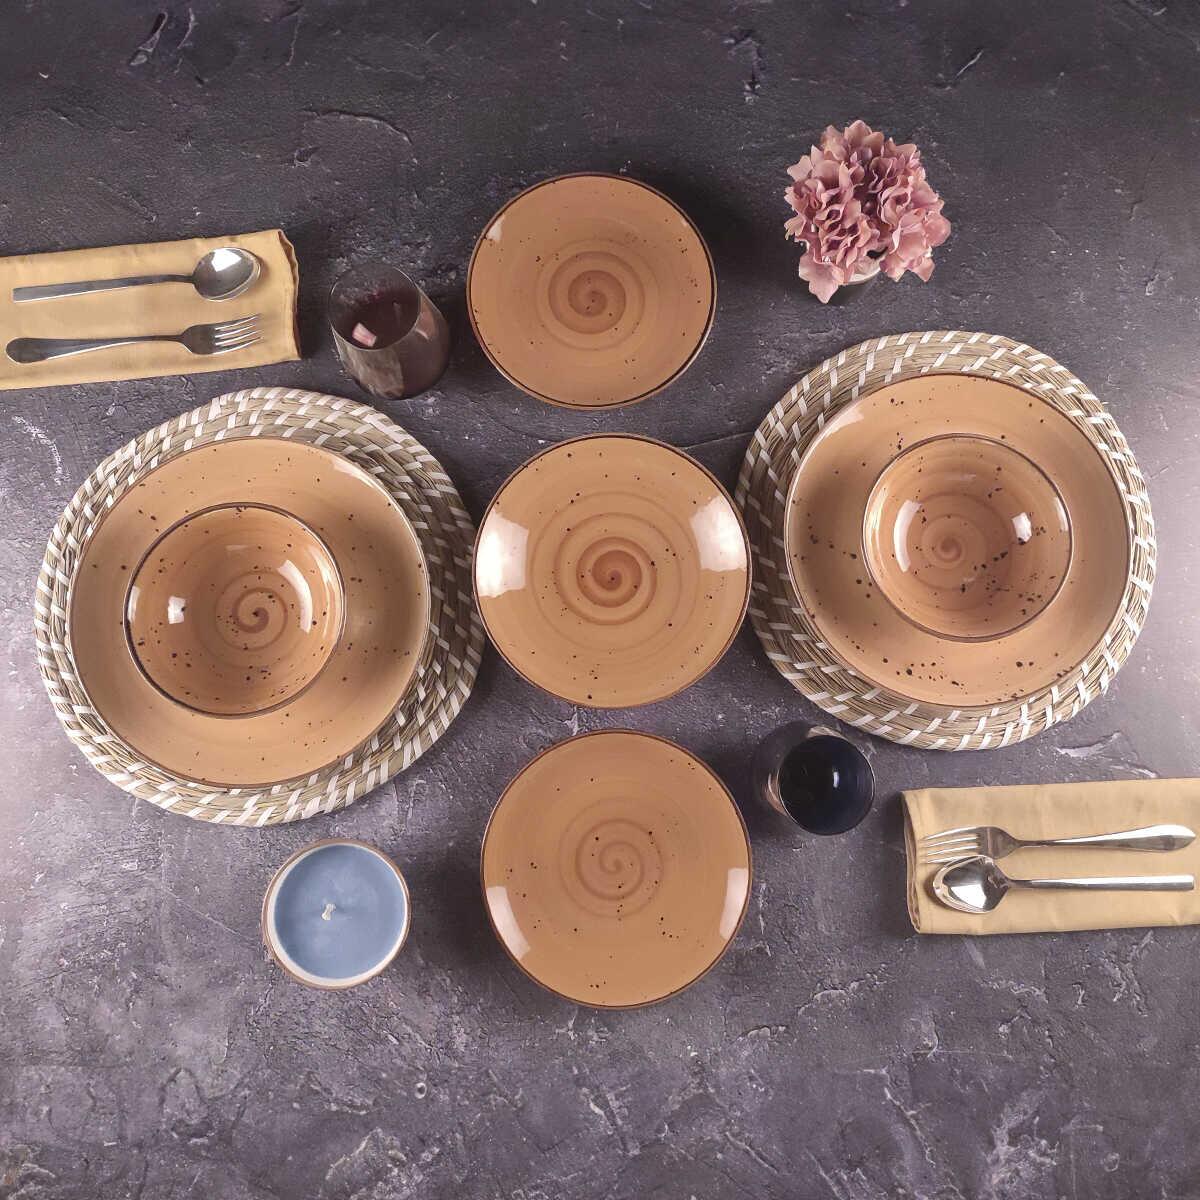 Tulu Sea Red Brown 24 Piece Dinner Set for 6 Persons